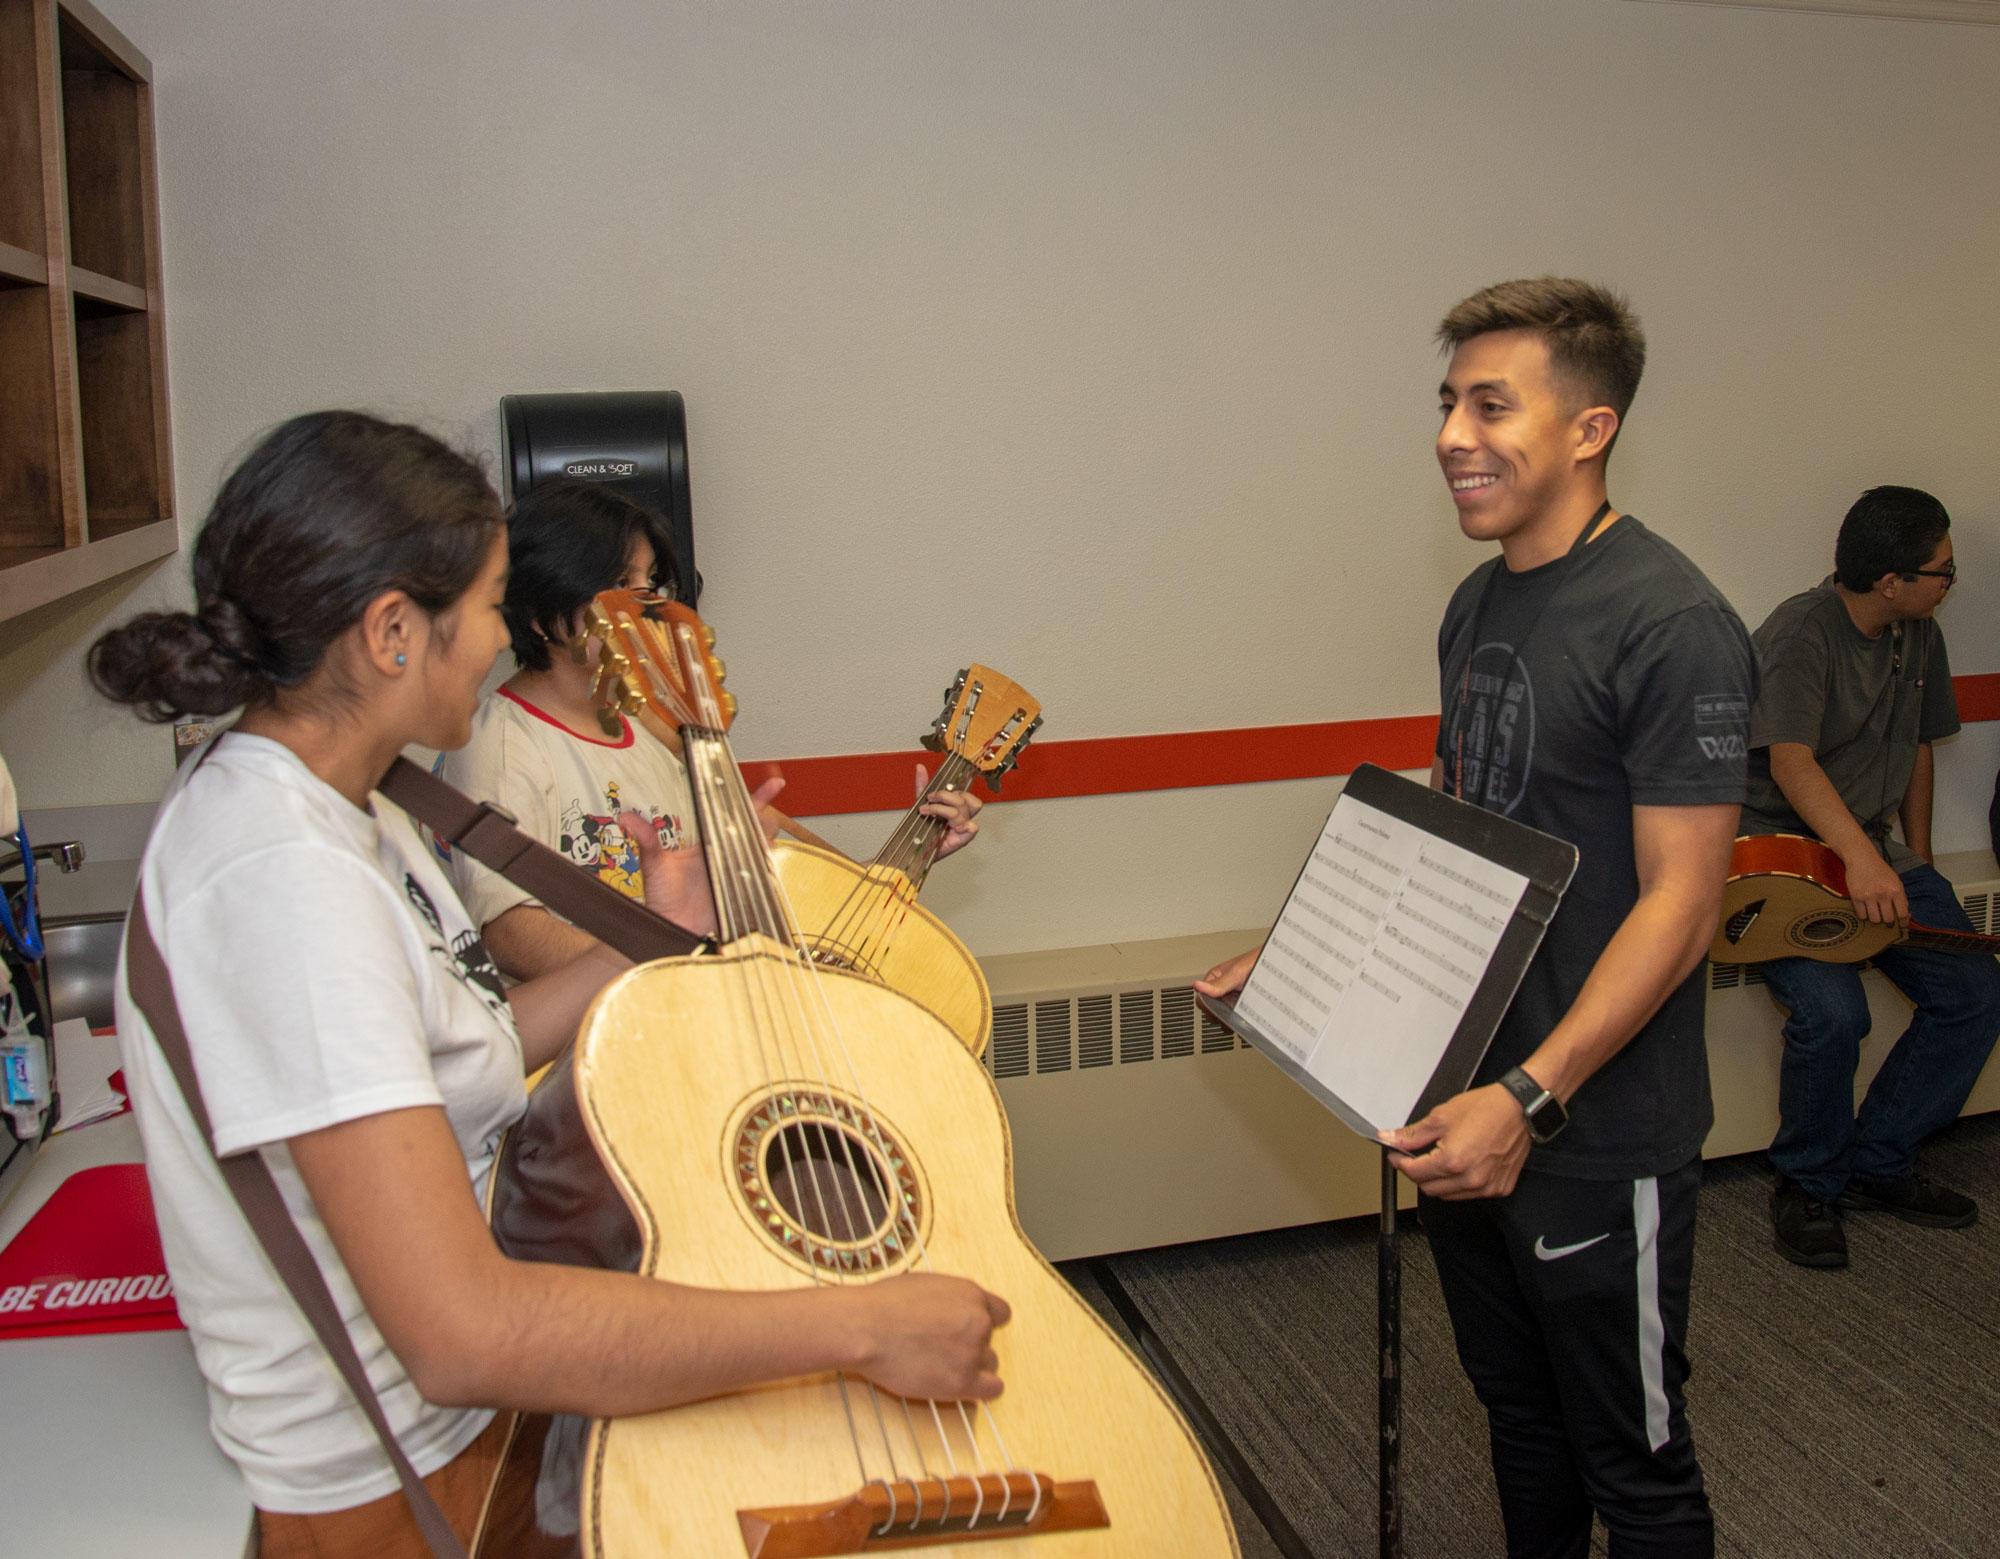 Two teenaged girls are playing large acoustic guitars while talking to a young man during a rehearsal.